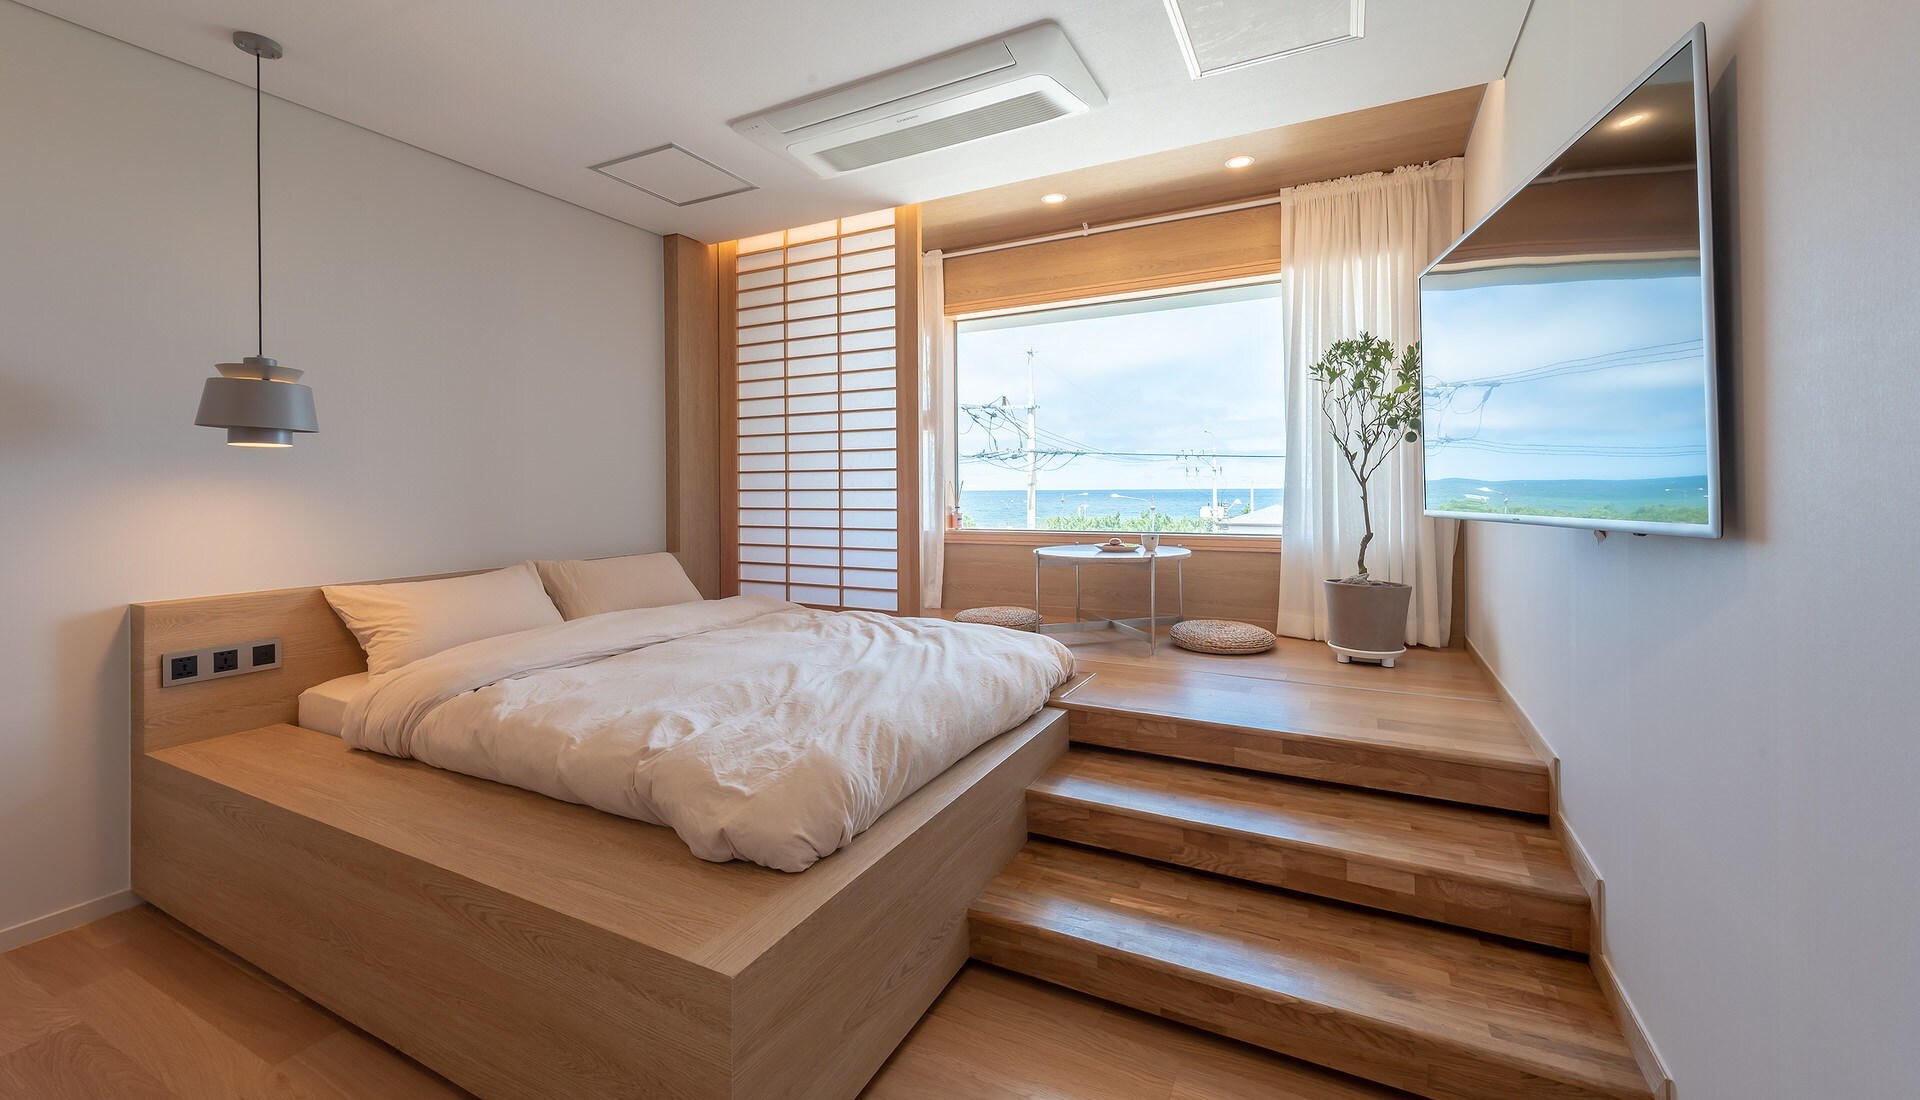 Property Image 1 - cozy modern apartment with ocean view 103